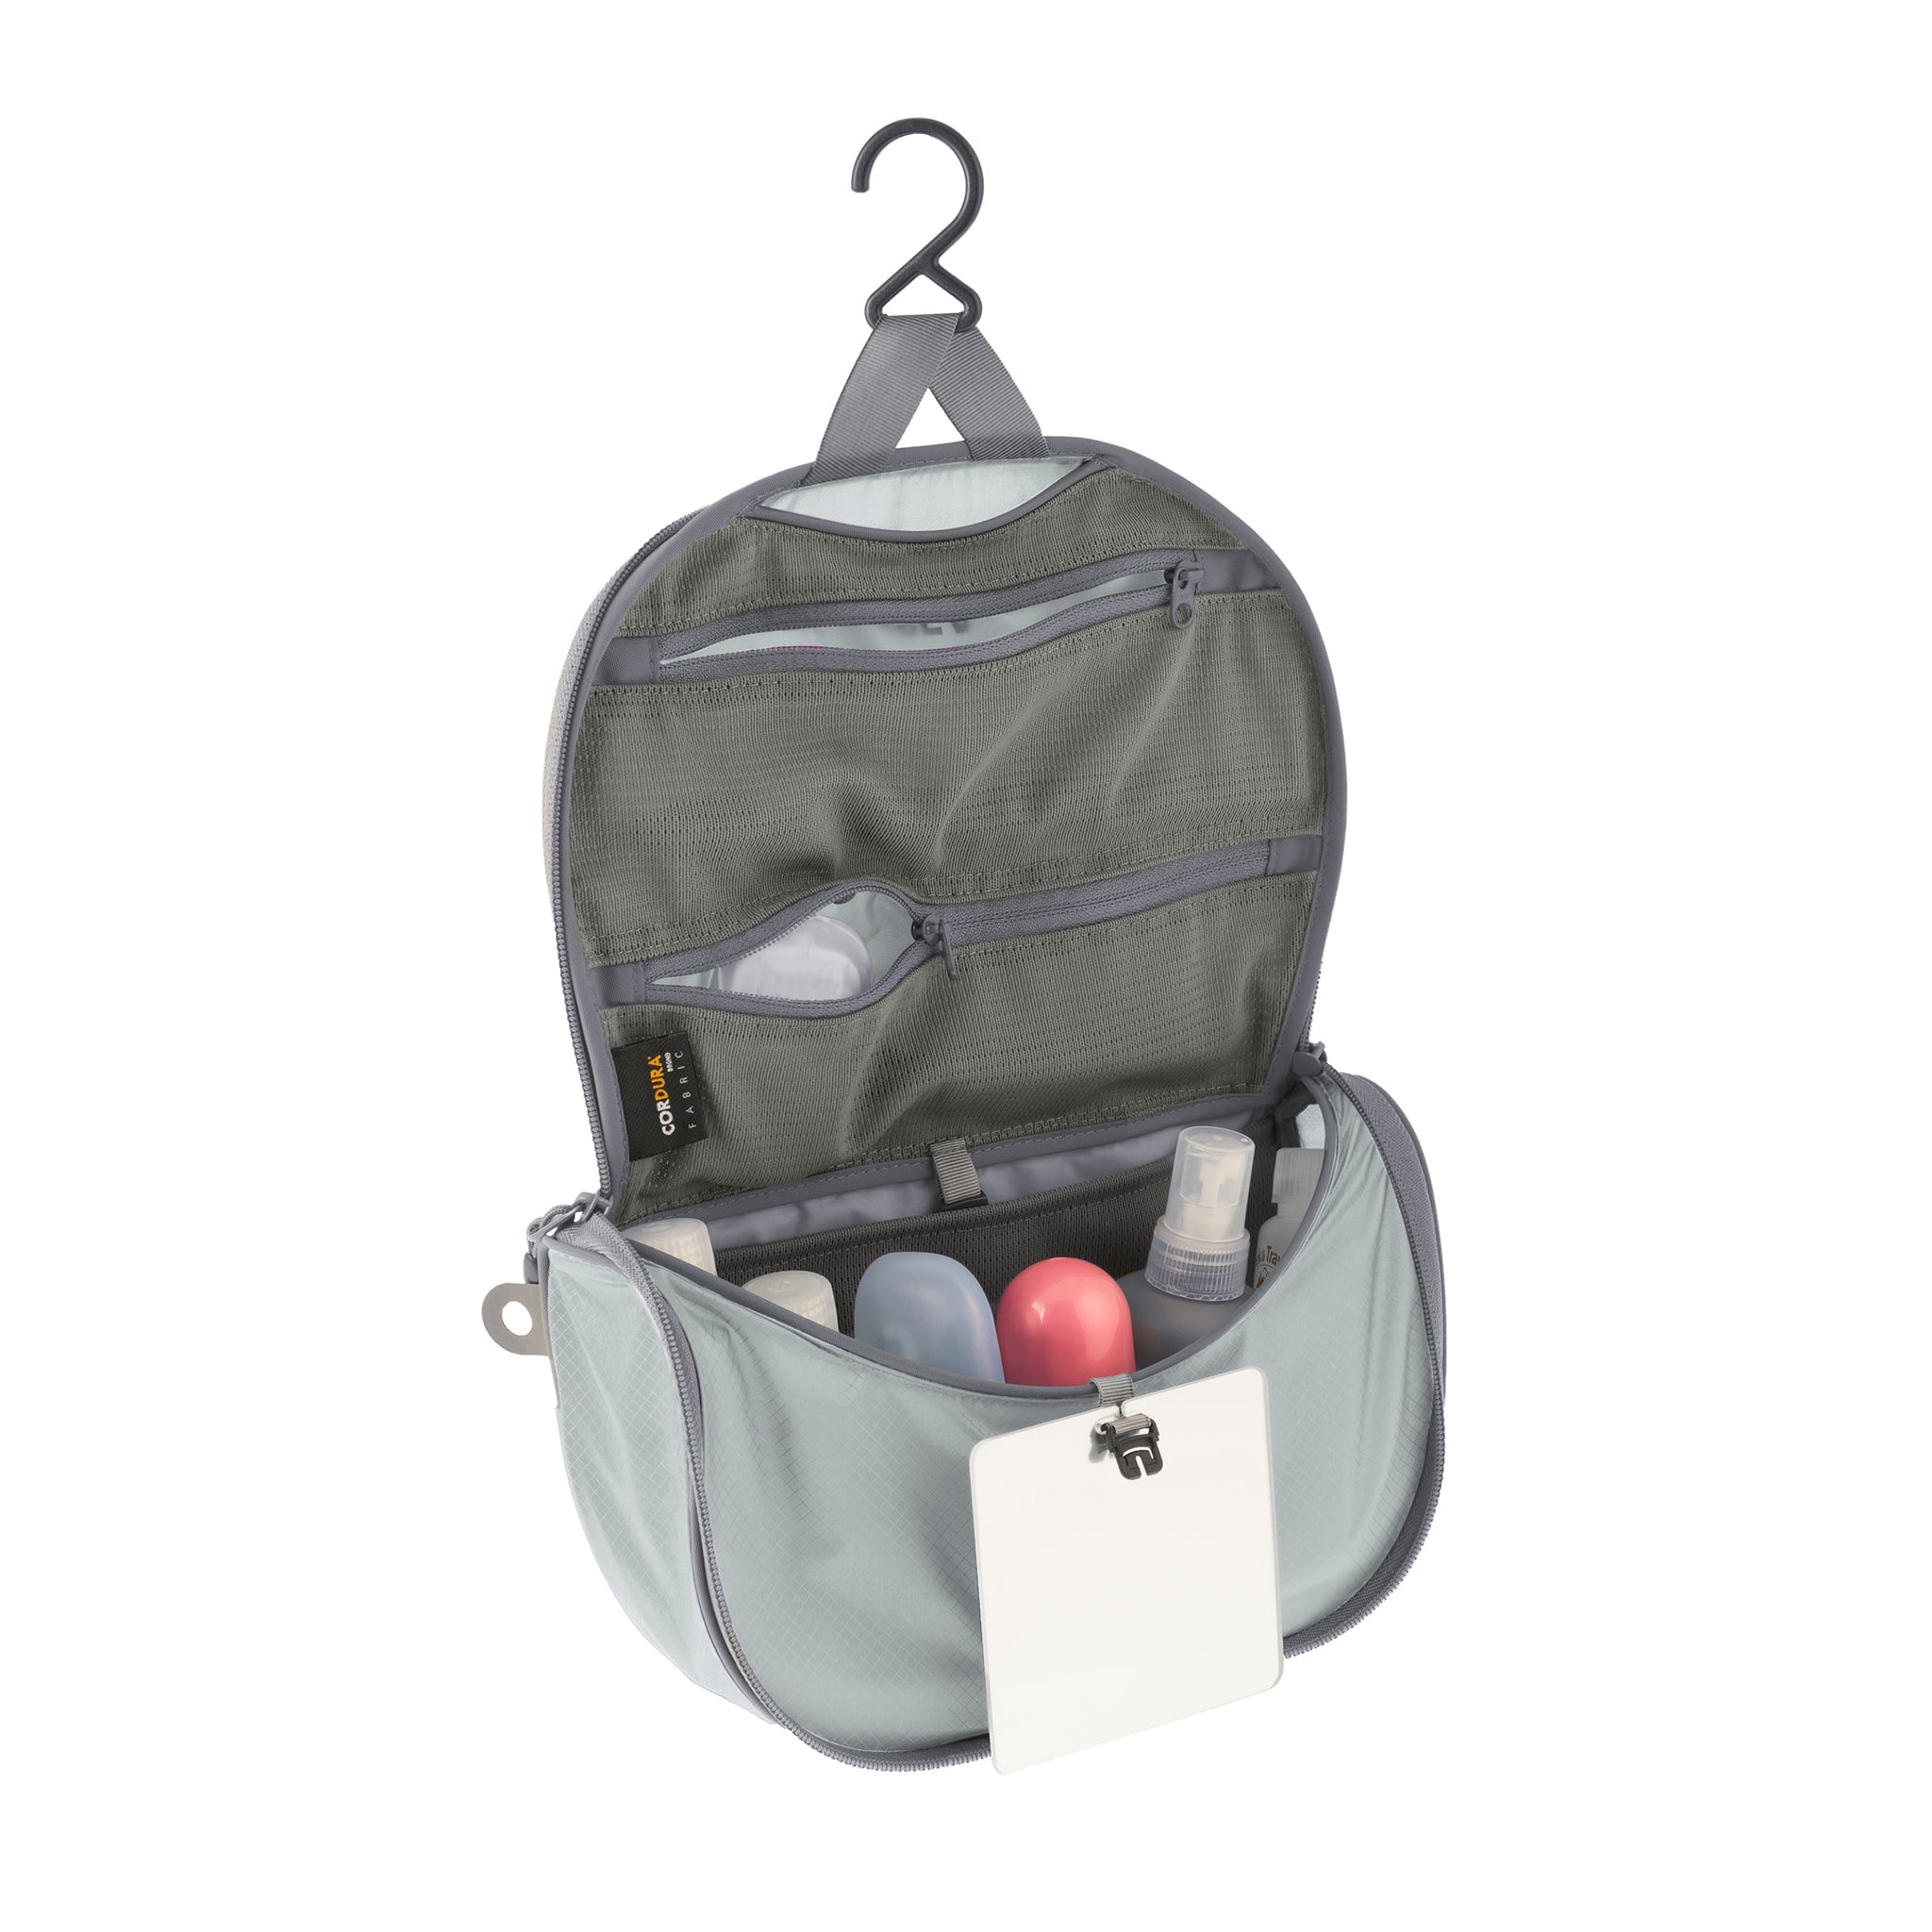 Stay Organized with Our Hanging Travel Toiletry Bag